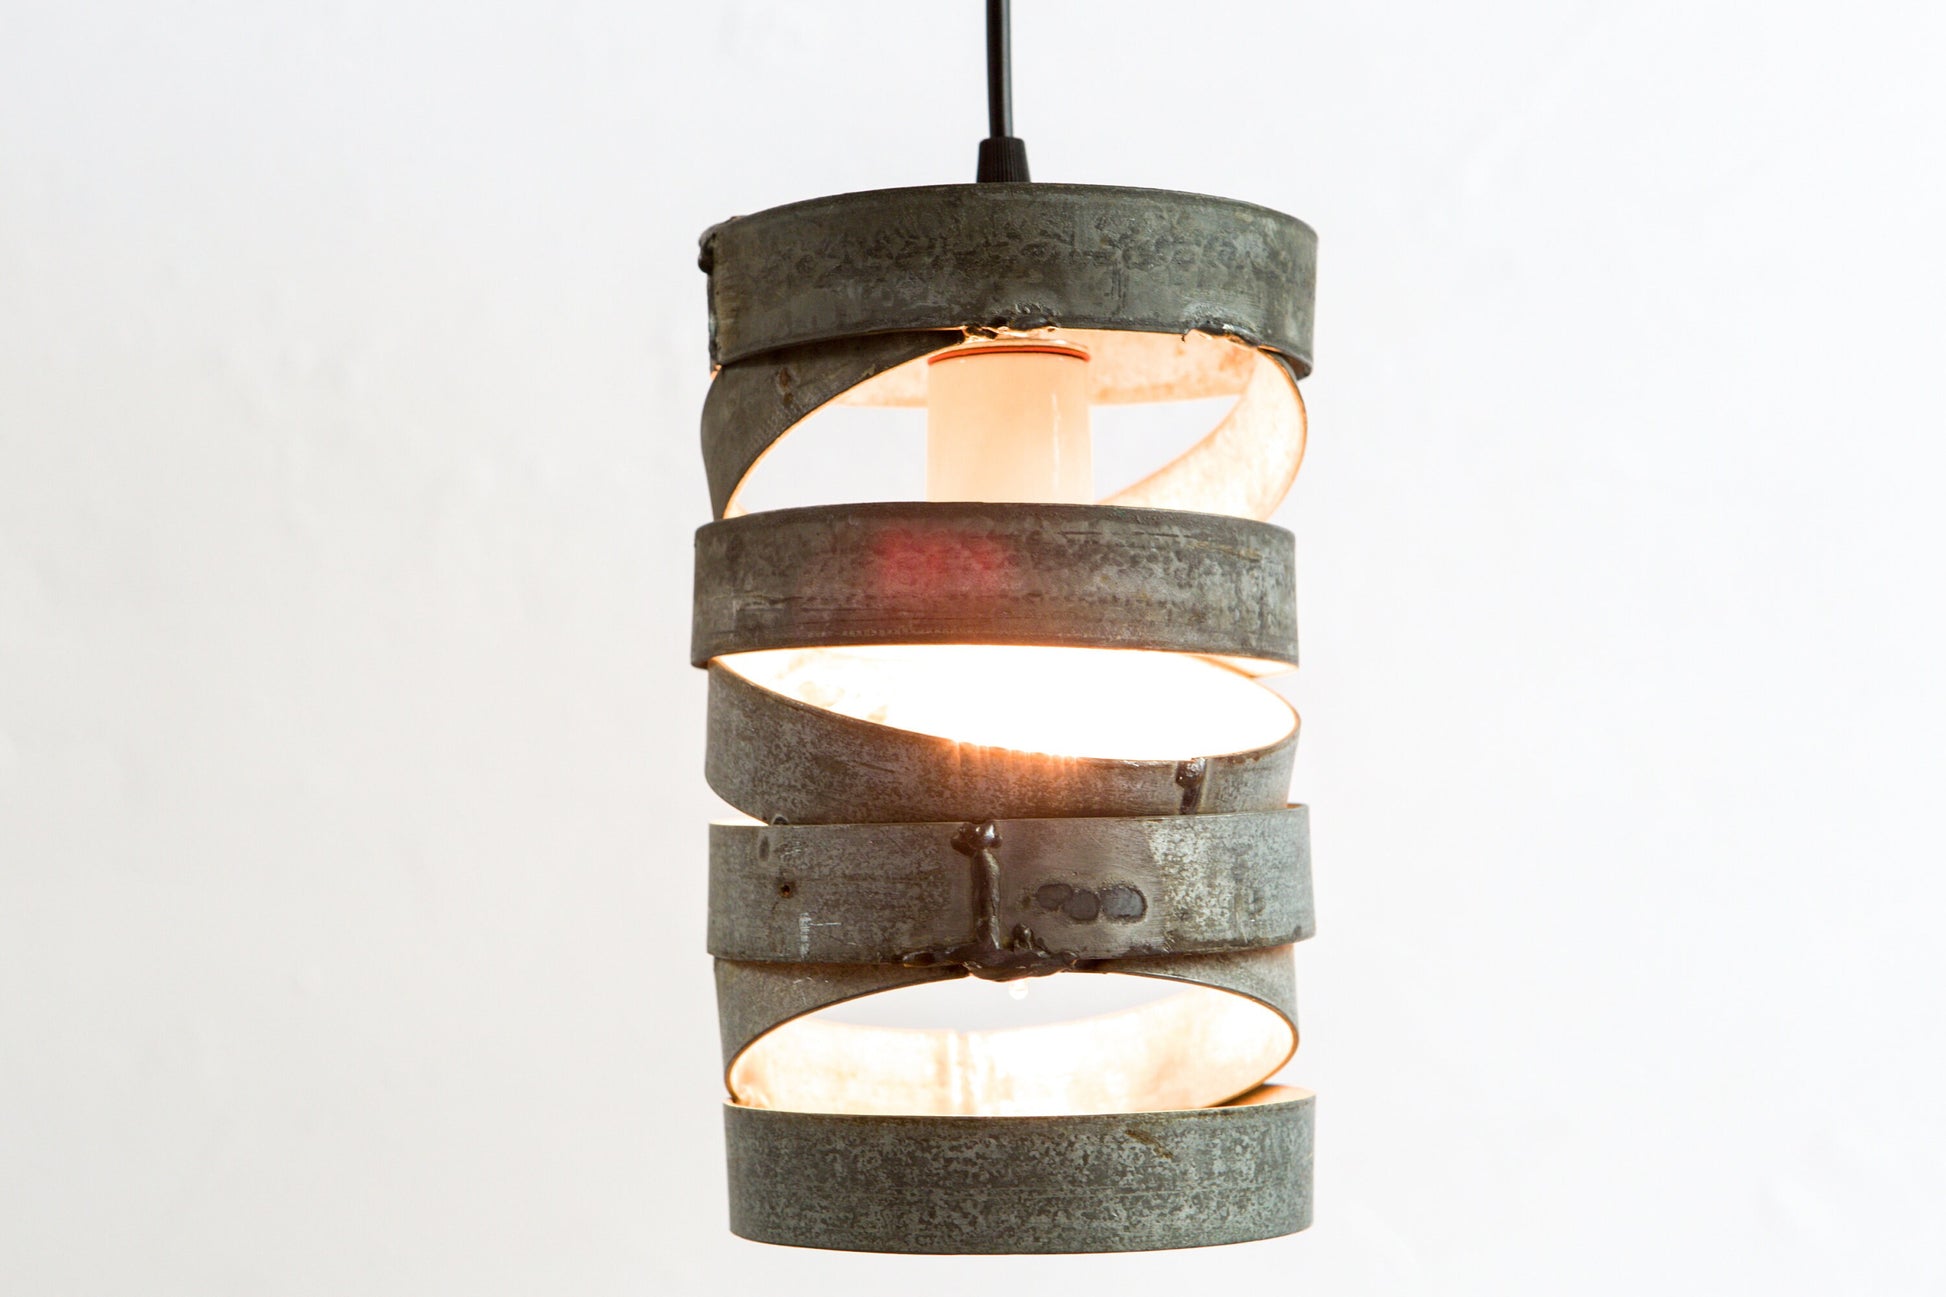 Wine Barrel Ring Staggered Pendant Light - Tala - Made from retired CA wine barrel rings. 100% Recycled!